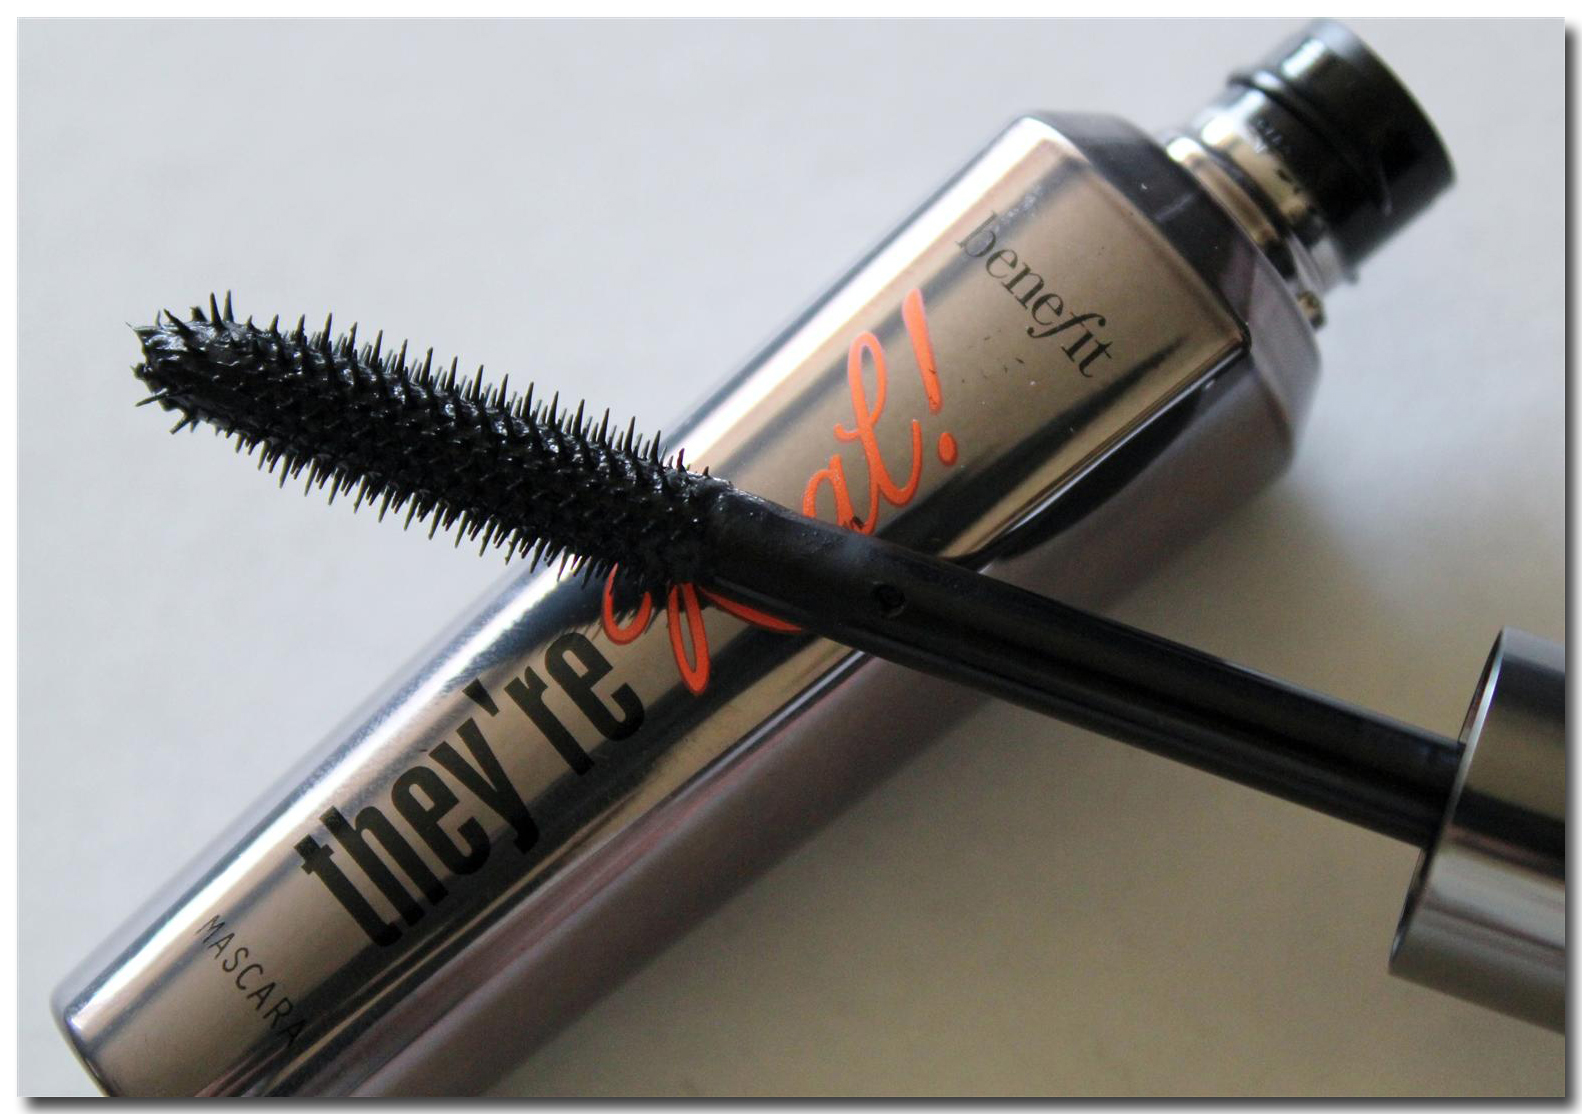 Review of Benefit Cosmetics They'Re Real! Mascara